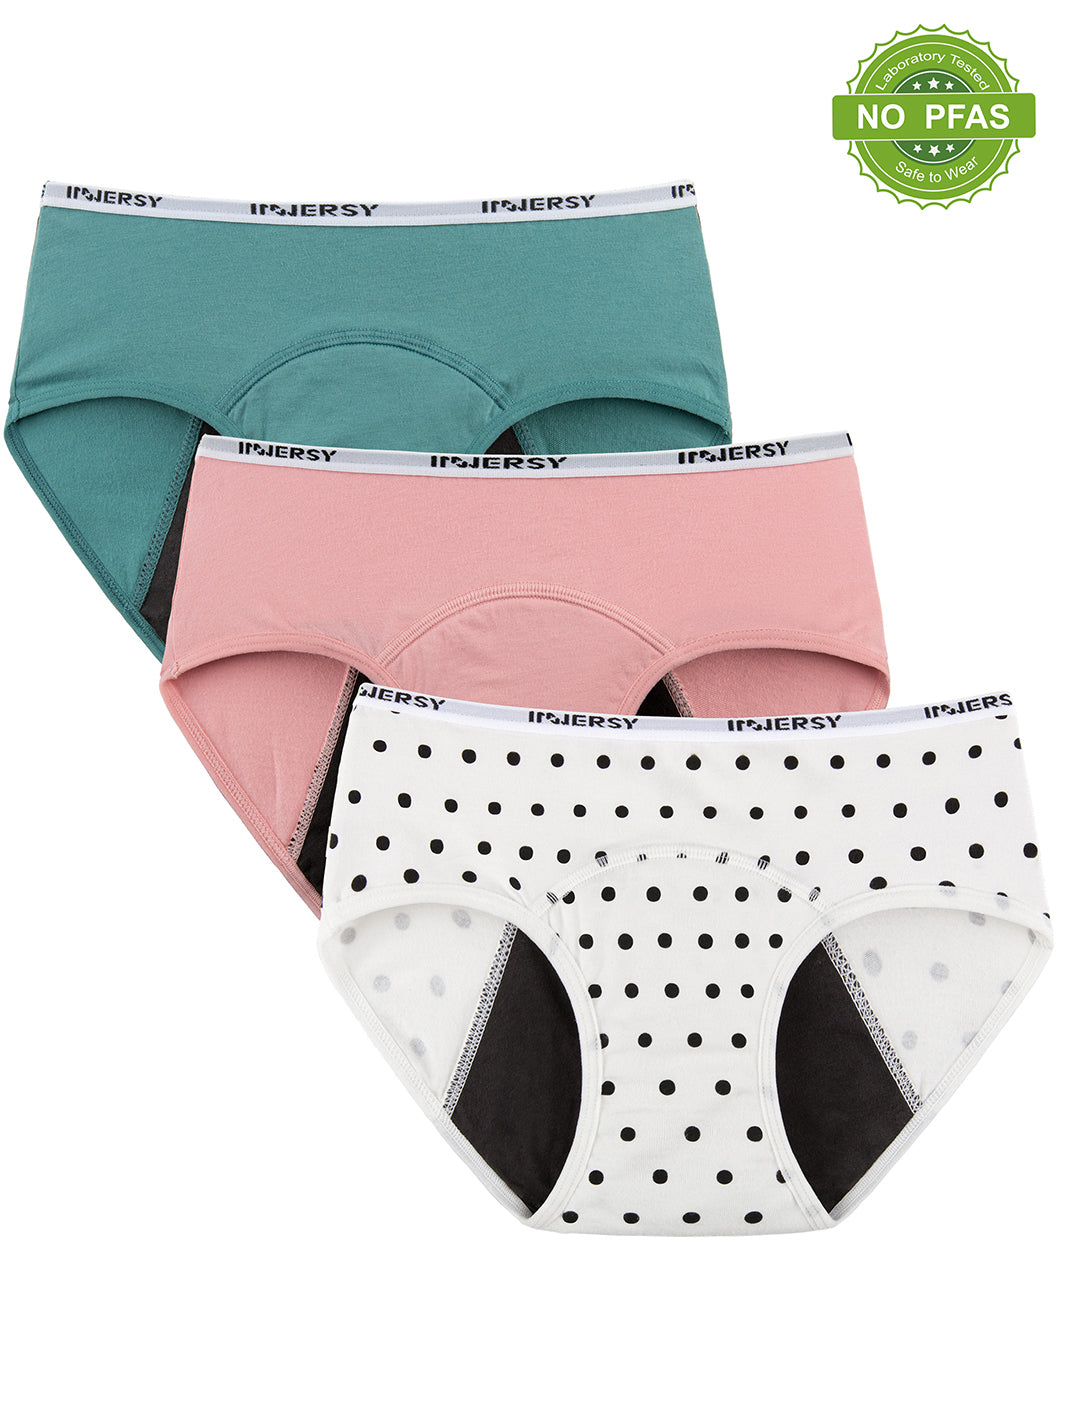 INNERSY Period Panties for Girls Cotton Menstrual Underwear for First  Period Starter 3-Pack (M(10-12 yrs), Various Black)